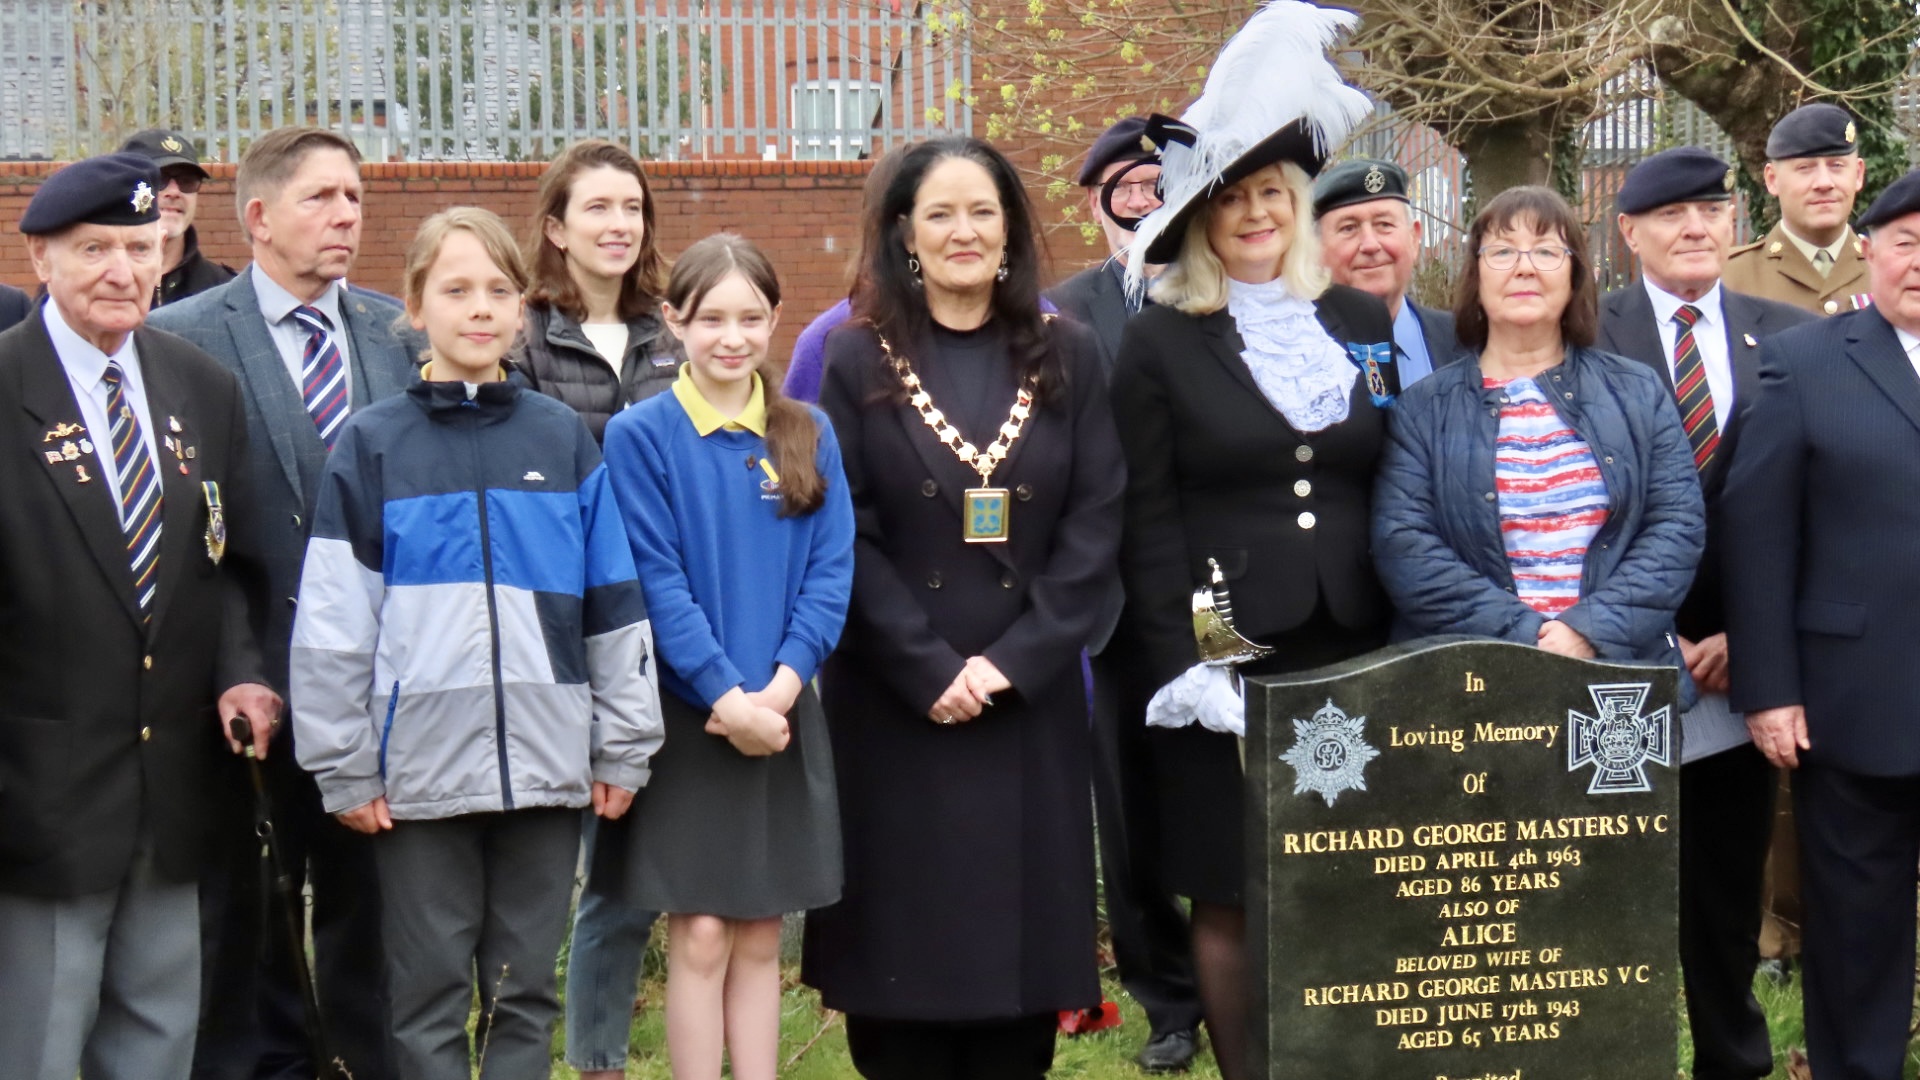 Crowds paid their respects as a new headstone was unveiled in tribute to Private Richard George Masters, from Southport, who was awarded a Victoria Cross when he saved the lives of 200 wounded British Army soldiers on 9th April 1918 during World War One. Photo by Andrew Brown Stand Up For Southport